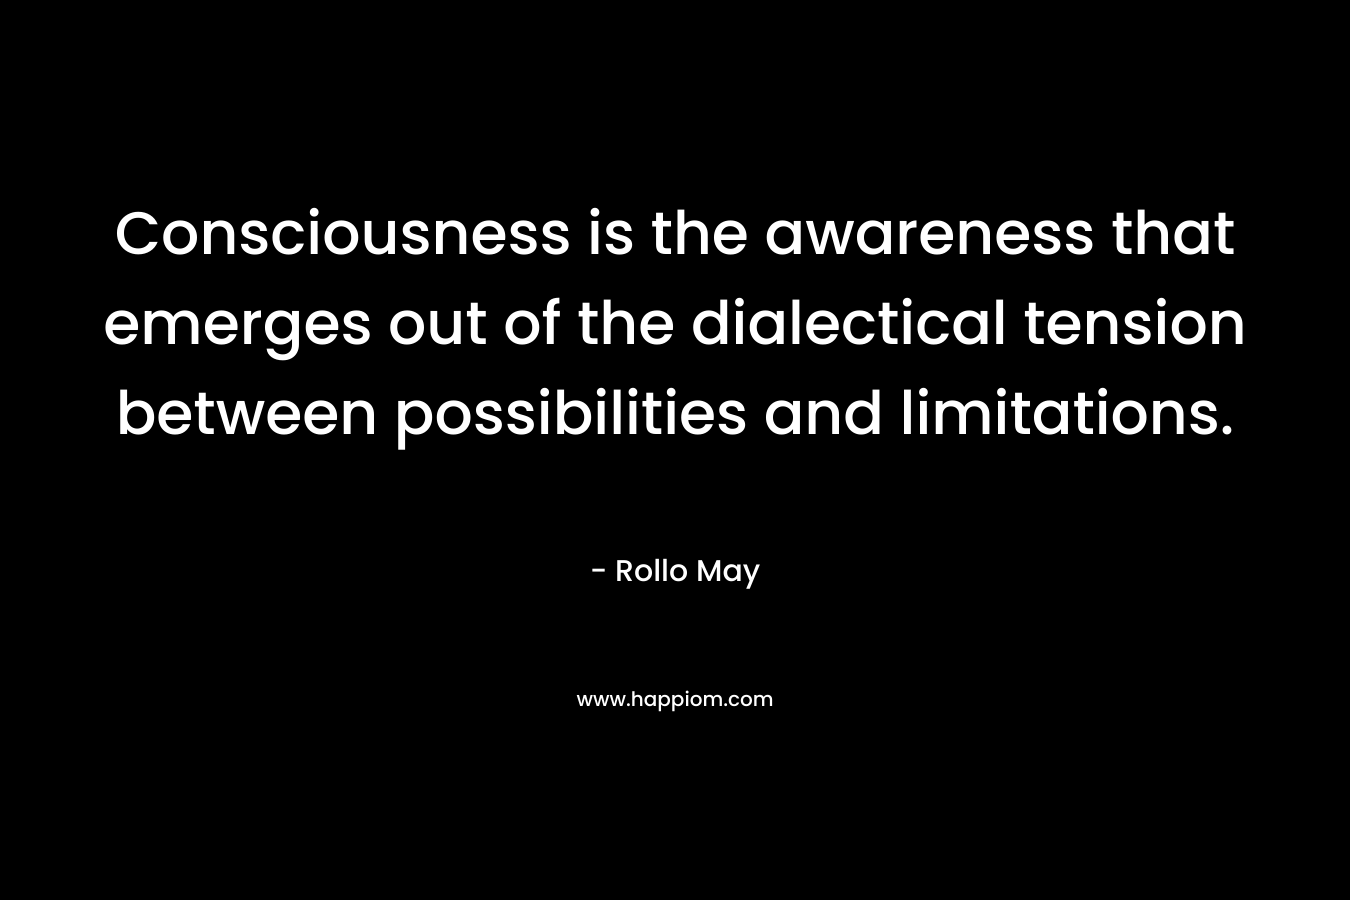 Consciousness is the awareness that emerges out of the dialectical tension between possibilities and limitations.